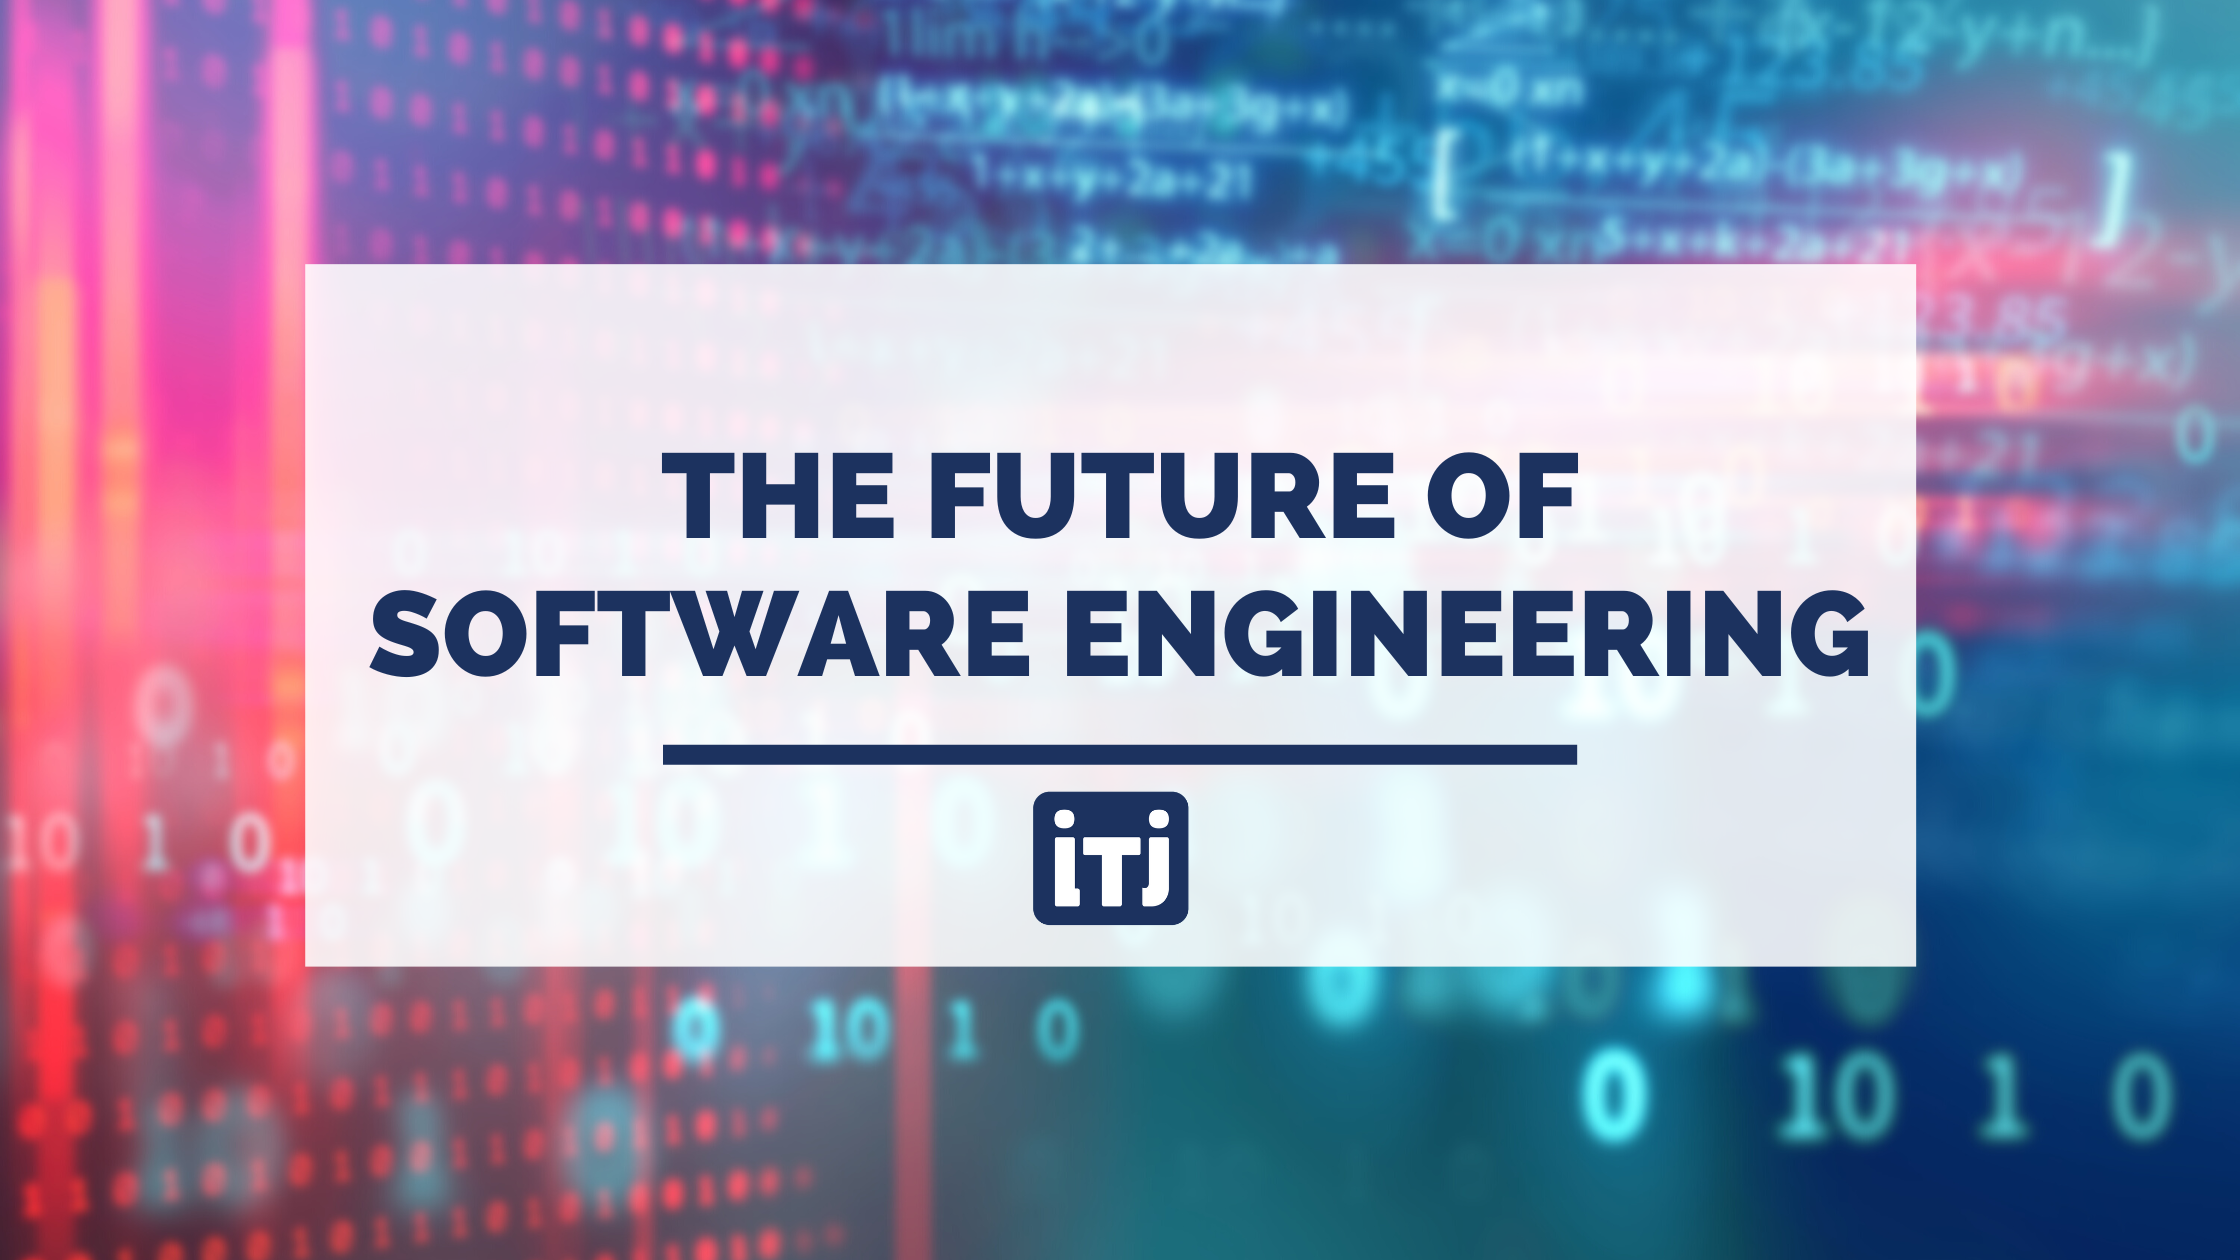 The future of Software Engineering by ITJ